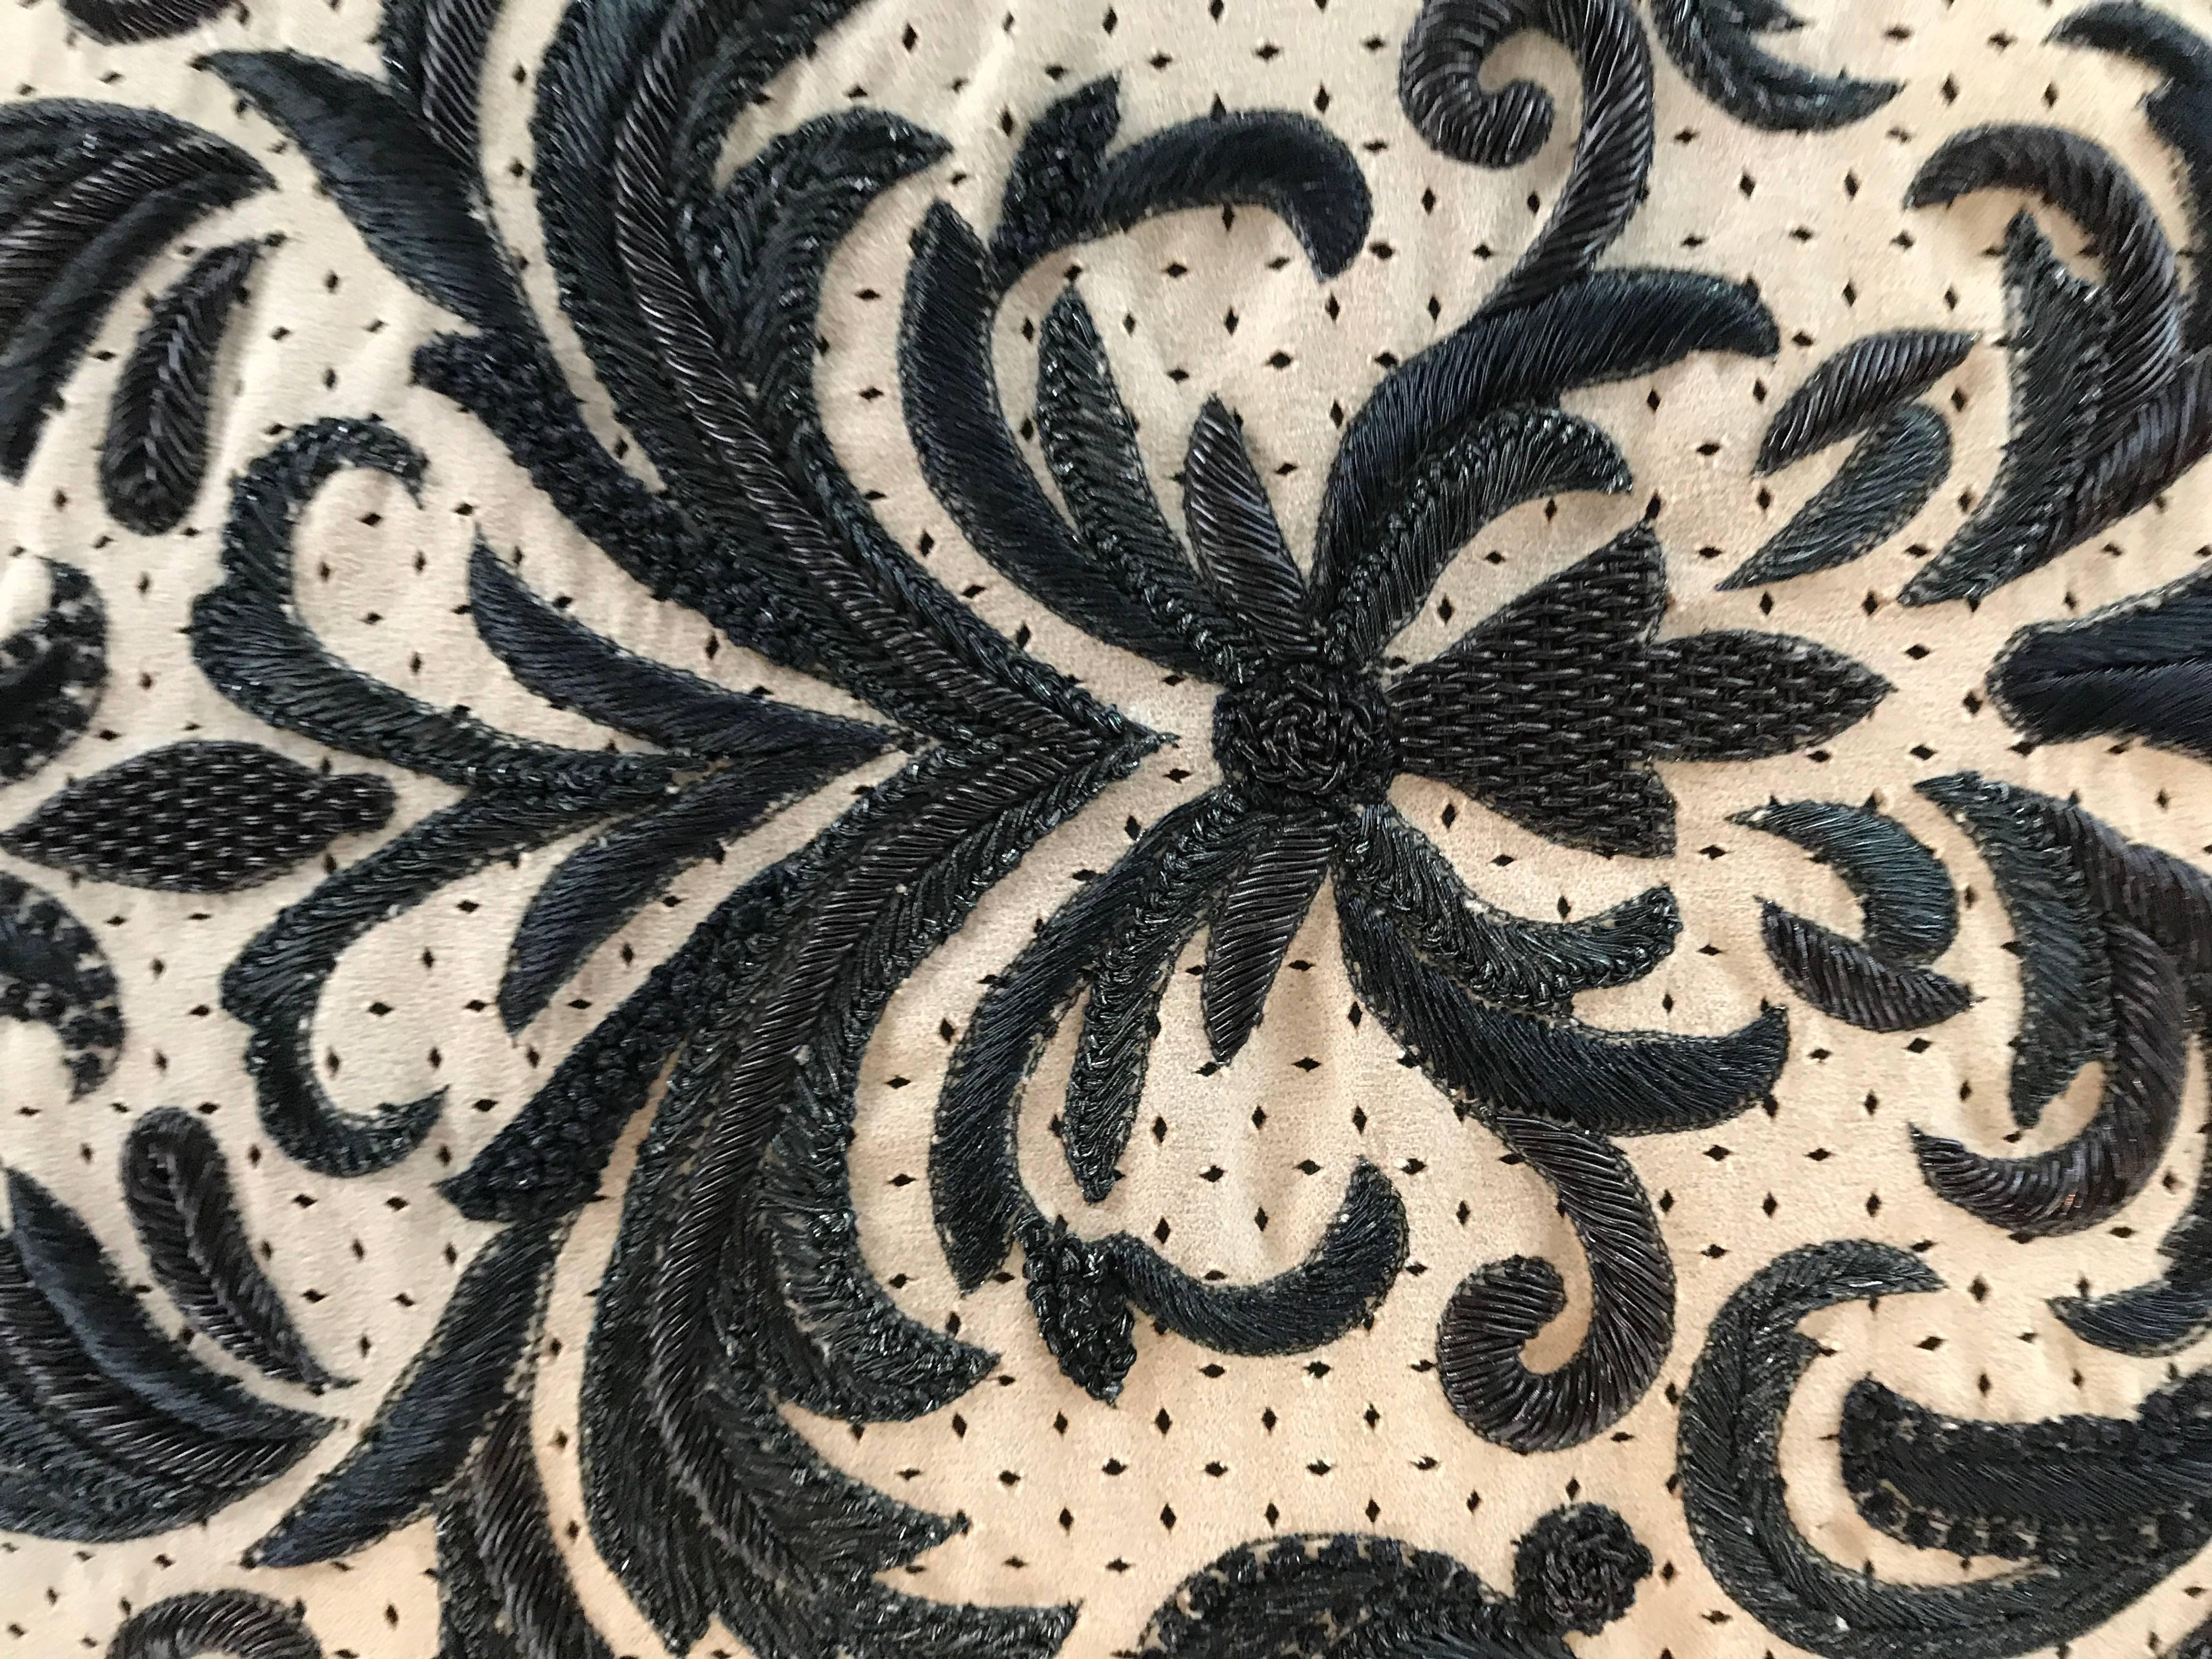 This very high end square pillow came from the premiere home store in Palm Springs, CA over a decade ago. Purchased by my clients, they were never used. Made entirely of high end perforated ultra suede, the ornate design is embroidered in a thick,